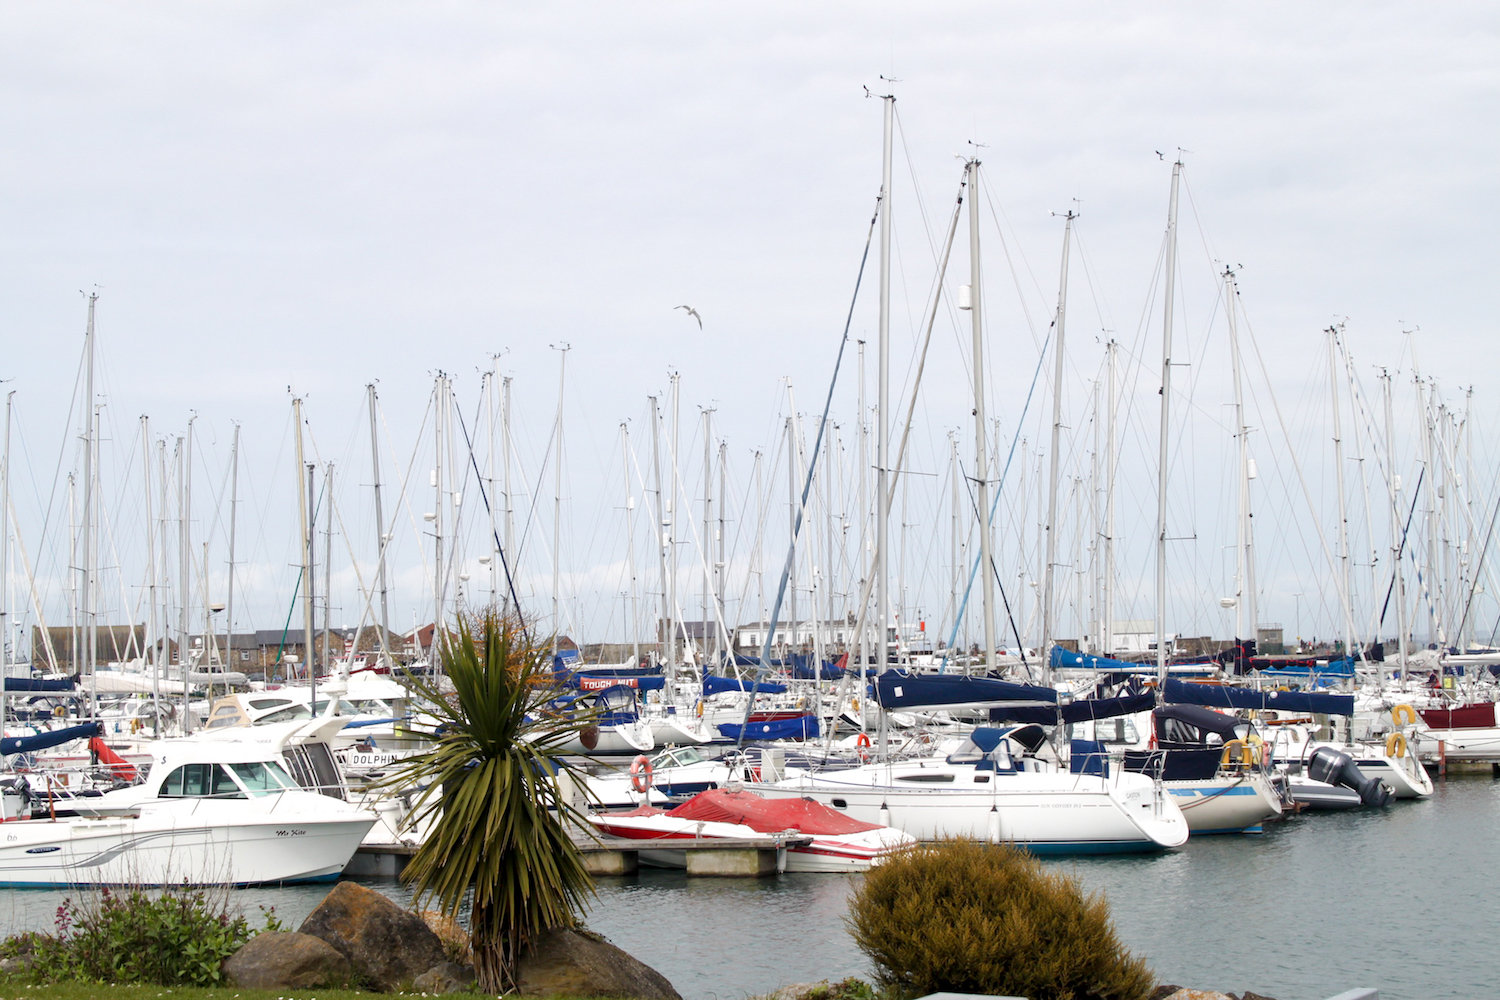 Boats in Howth harbor (Eat Me. Drink Me.)